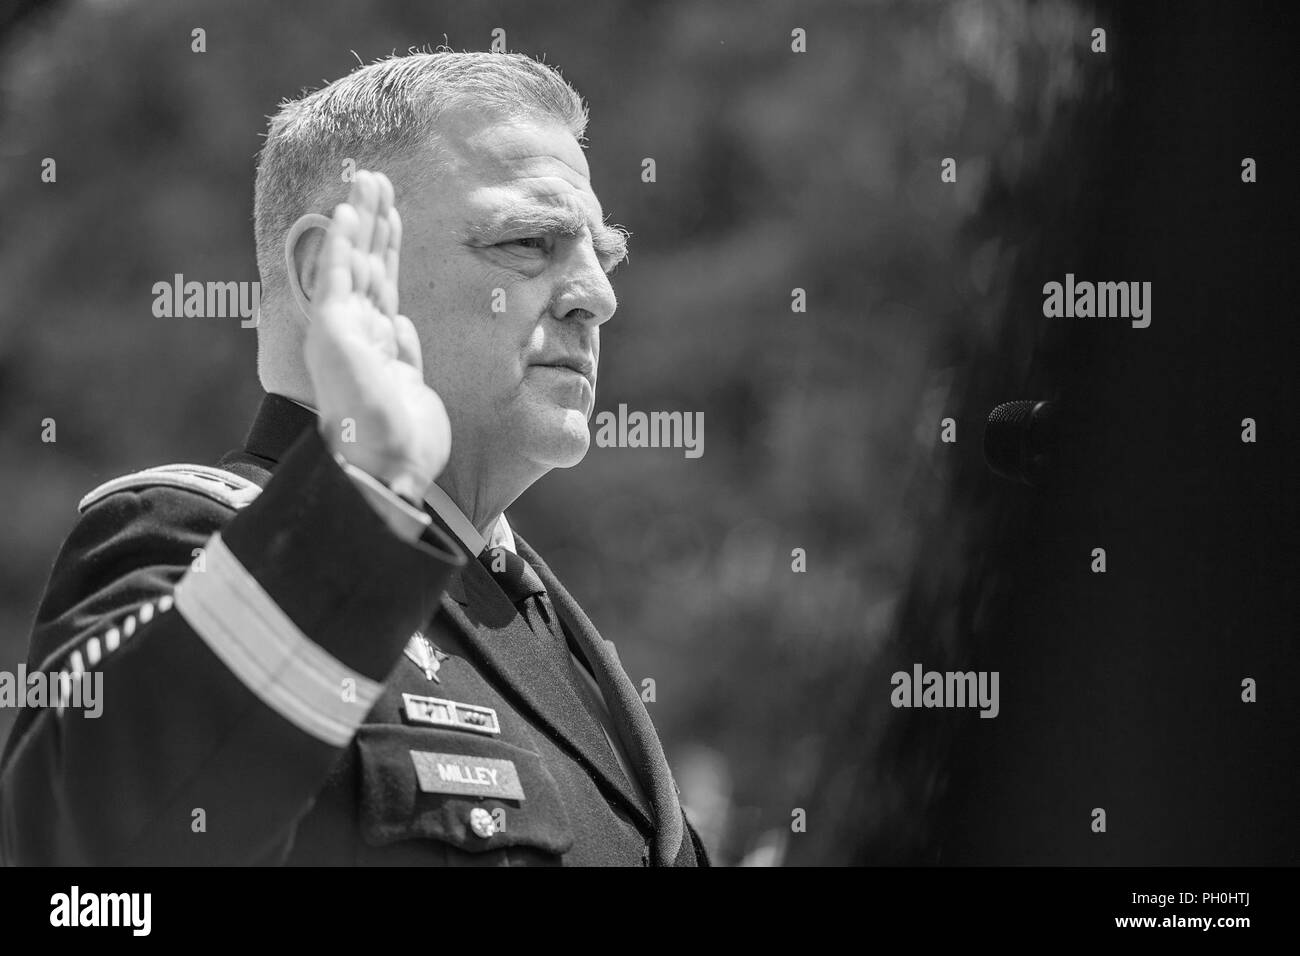 U.S. Army Chief of Staff Mark A. Milley swears in Soldiers assigned to the Old Guard at the 243rd Army Birthday cake cutting ceremony, Pentagon, Washington, D.C., June 14, 2018. Stock Photo